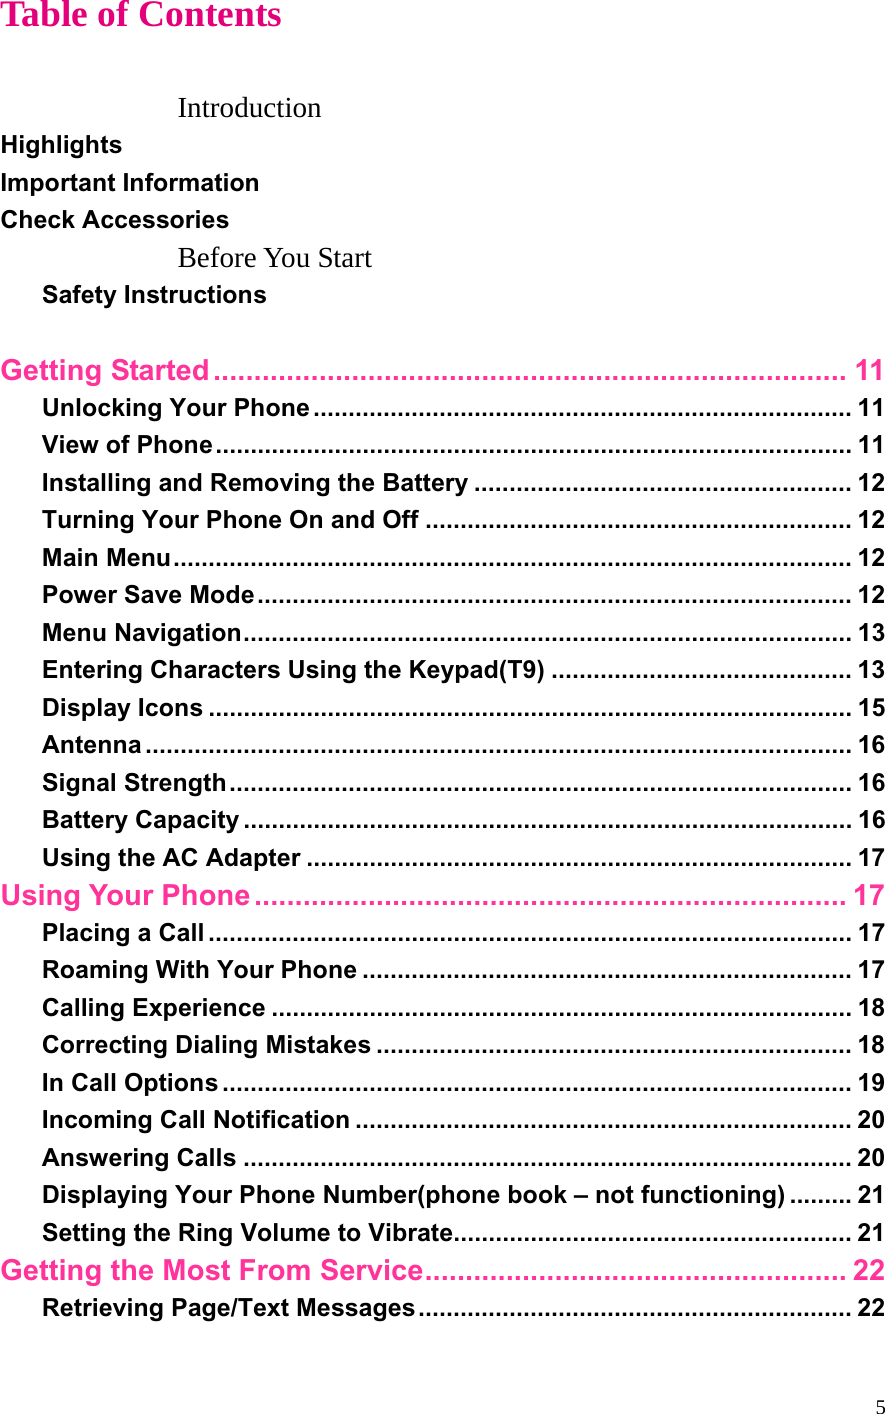 5 Table of Contents  Introduction Highlights Important Information Check Accessories Before You Start Safety Instructions  Getting Started.............................................................................. 11 Unlocking Your Phone ............................................................................. 11 View of Phone........................................................................................... 11 Installing and Removing the Battery ...................................................... 12 Turning Your Phone On and Off ............................................................. 12 Main Menu................................................................................................. 12 Power Save Mode..................................................................................... 12 Menu Navigation....................................................................................... 13 Entering Characters Using the Keypad(T9) ........................................... 13 Display Icons ............................................................................................ 15 Antenna ..................................................................................................... 16 Signal Strength......................................................................................... 16 Battery Capacity ....................................................................................... 16 Using the AC Adapter .............................................................................. 17 Using Your Phone ......................................................................... 17 Placing a Call ............................................................................................ 17 Roaming With Your Phone ...................................................................... 17 Calling Experience ................................................................................... 18 Correcting Dialing Mistakes .................................................................... 18 In Call Options .......................................................................................... 19 Incoming Call Notification ....................................................................... 20 Answering Calls ....................................................................................... 20 Displaying Your Phone Number(phone book – not functioning) ......... 21 Setting the Ring Volume to Vibrate......................................................... 21 Getting the Most From Service.................................................... 22 Retrieving Page/Text Messages.............................................................. 22 